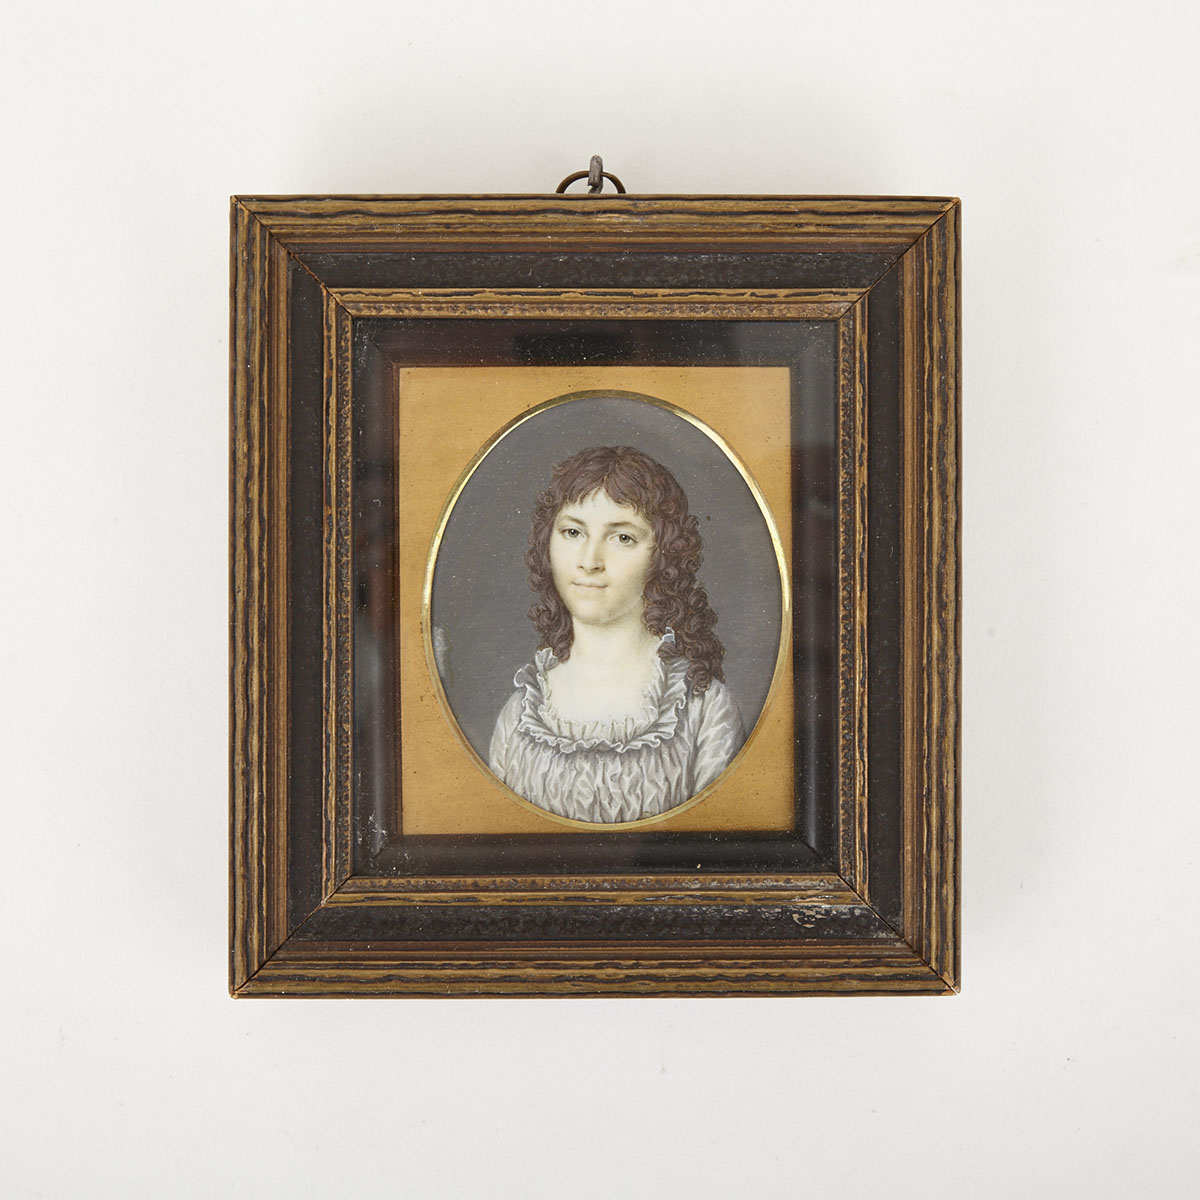 English School Portrait Miniature on Ivory of a Young Woman, early 19th century